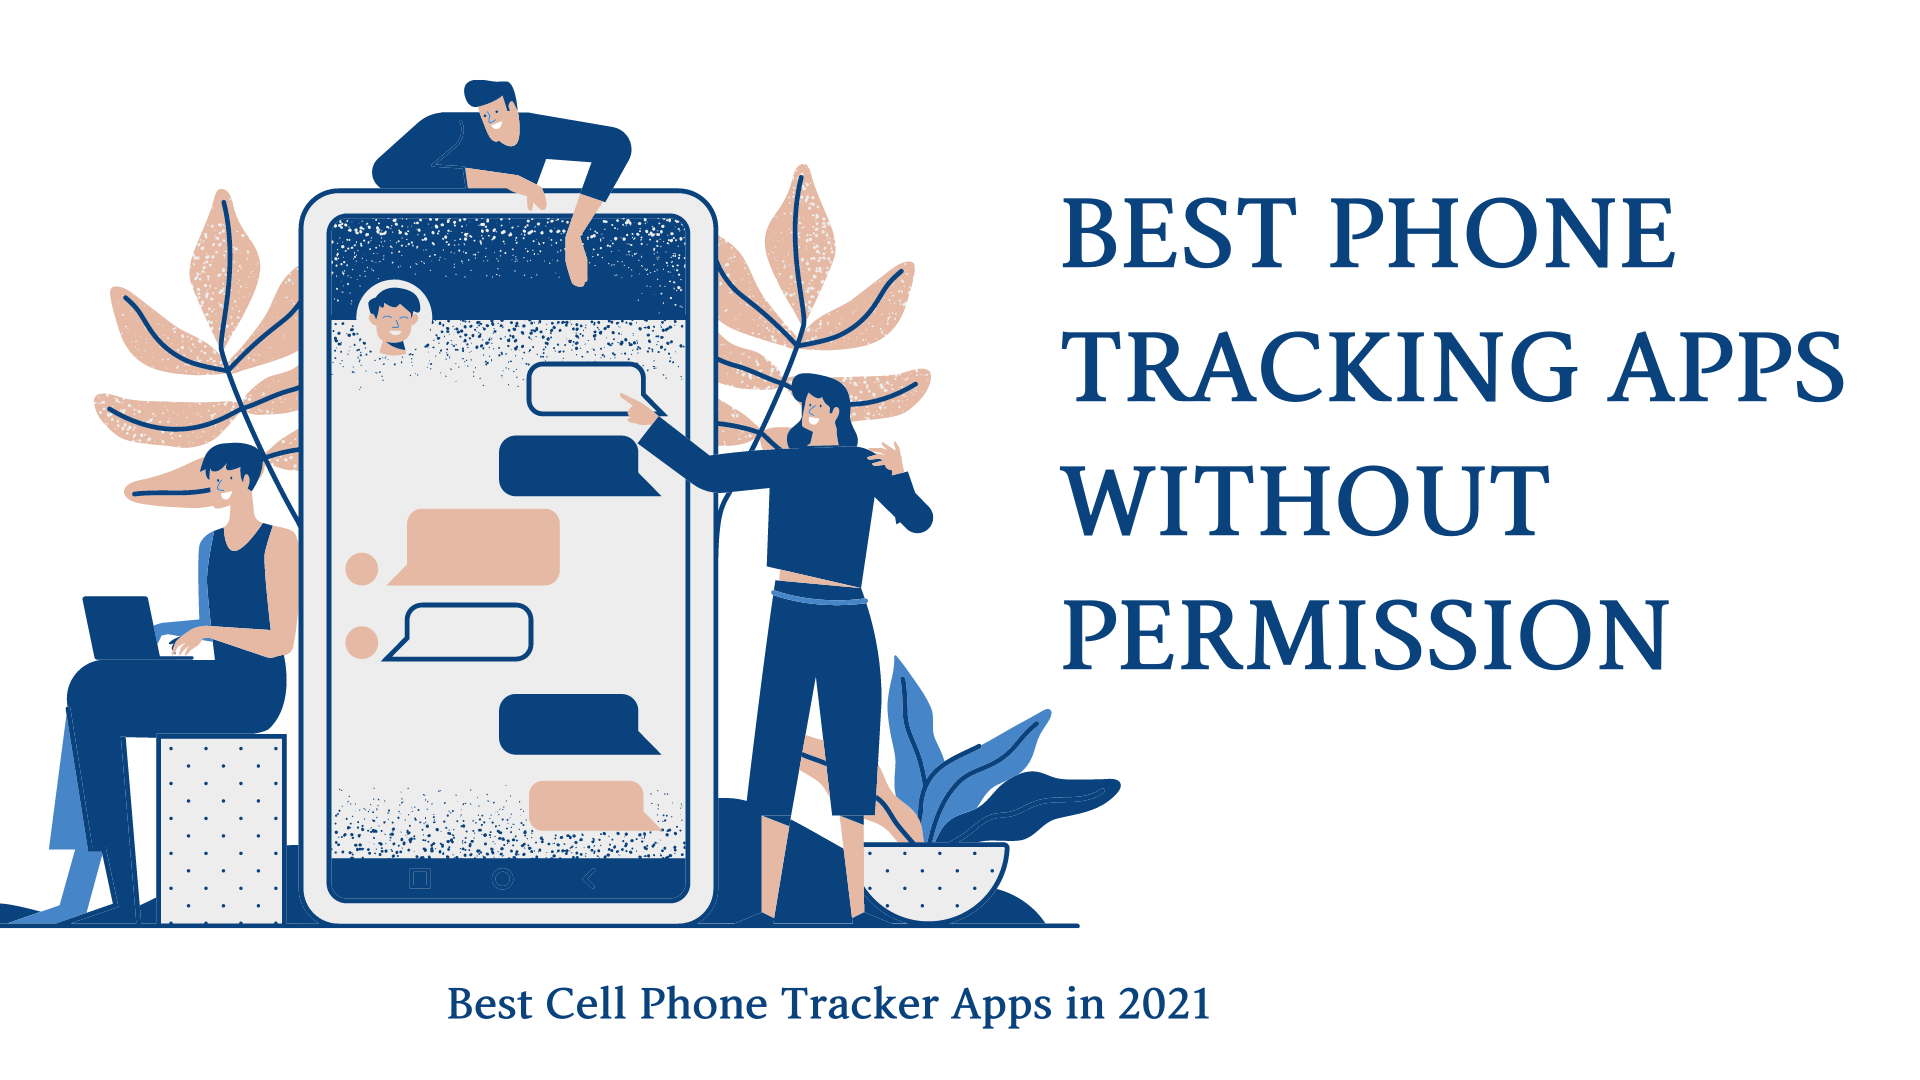 Best Phone Tracker Apps without Permission